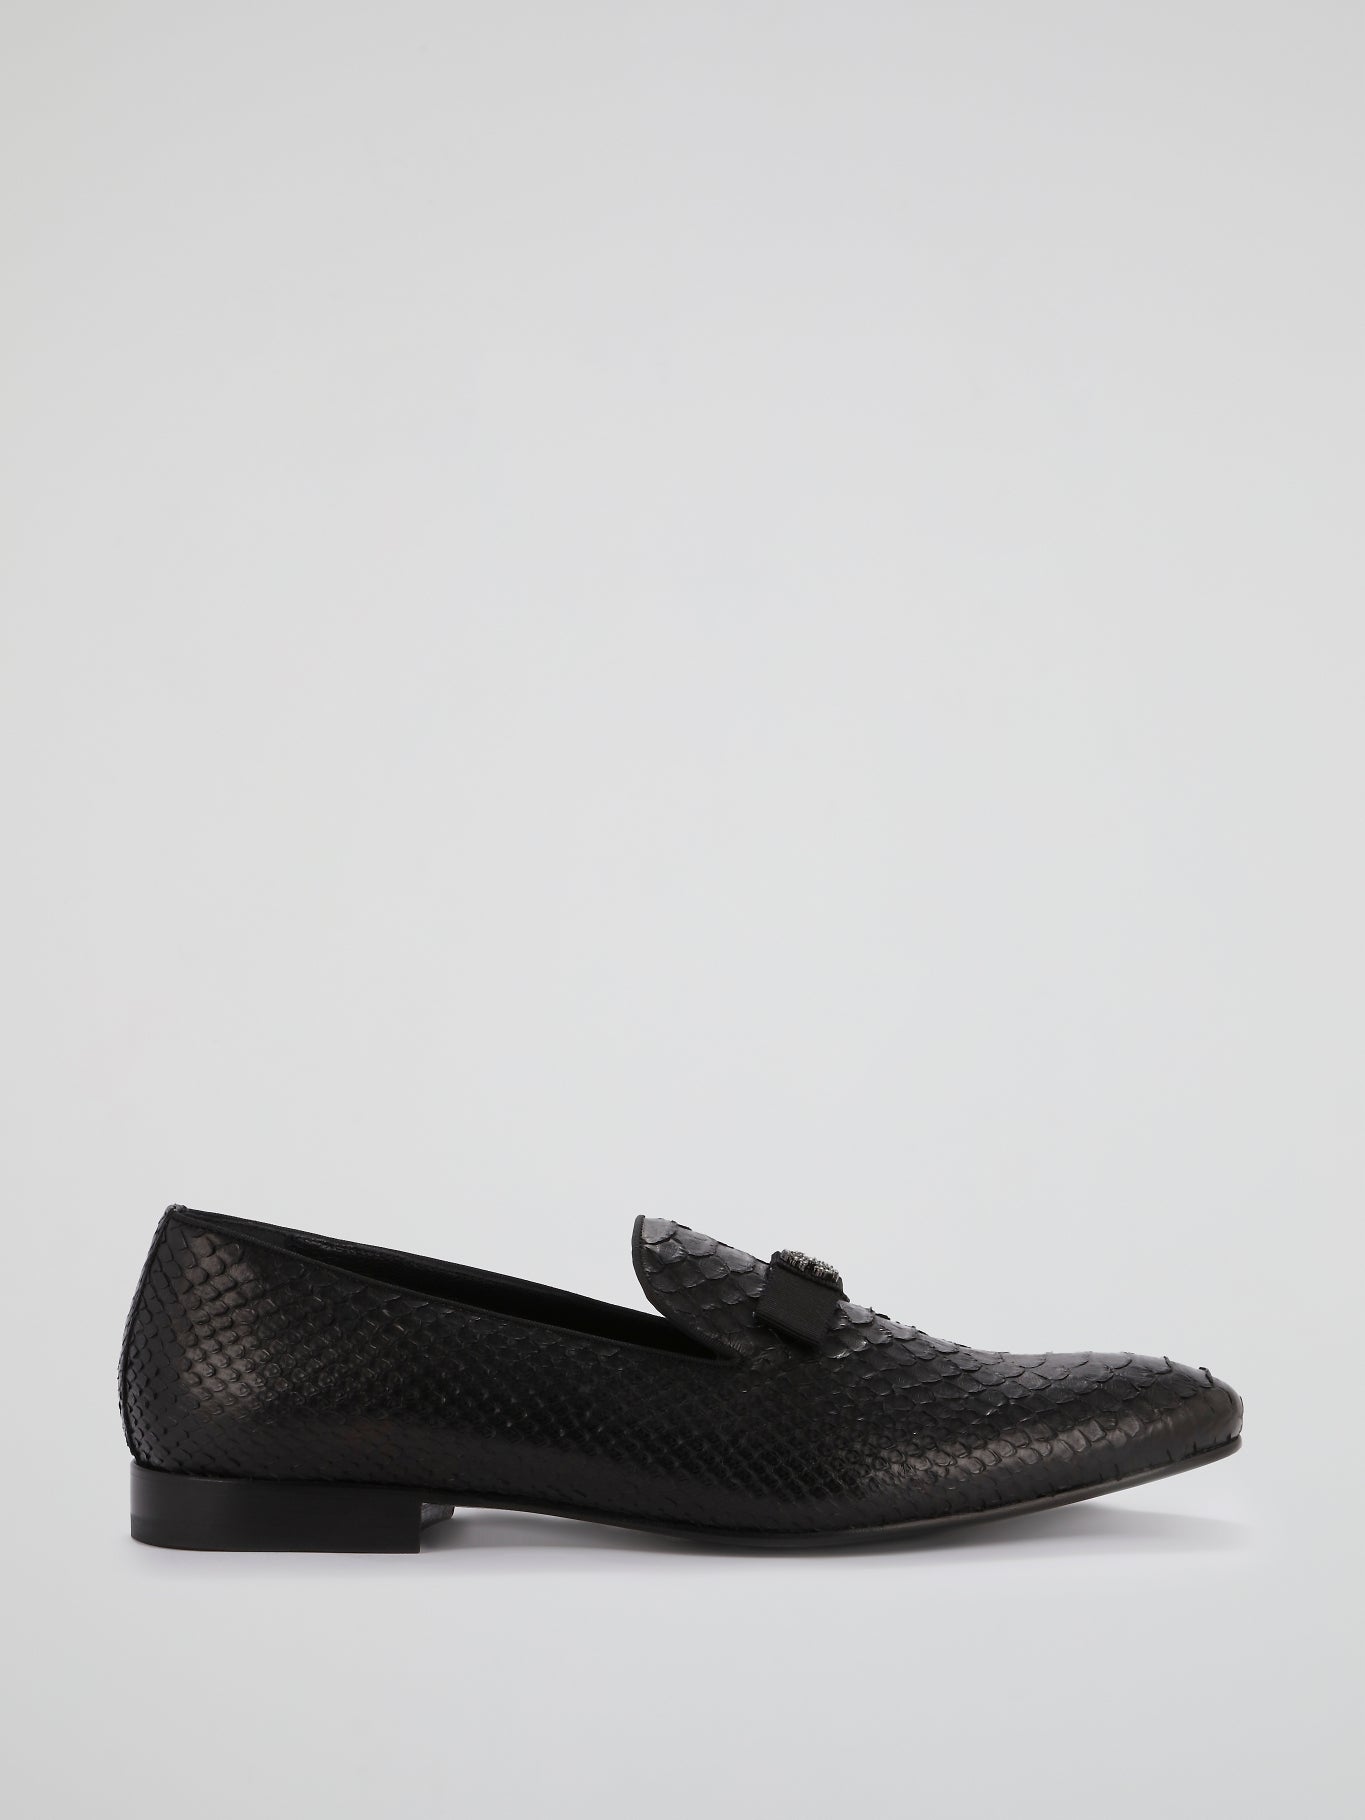 Black Reptilian Textured Loafers